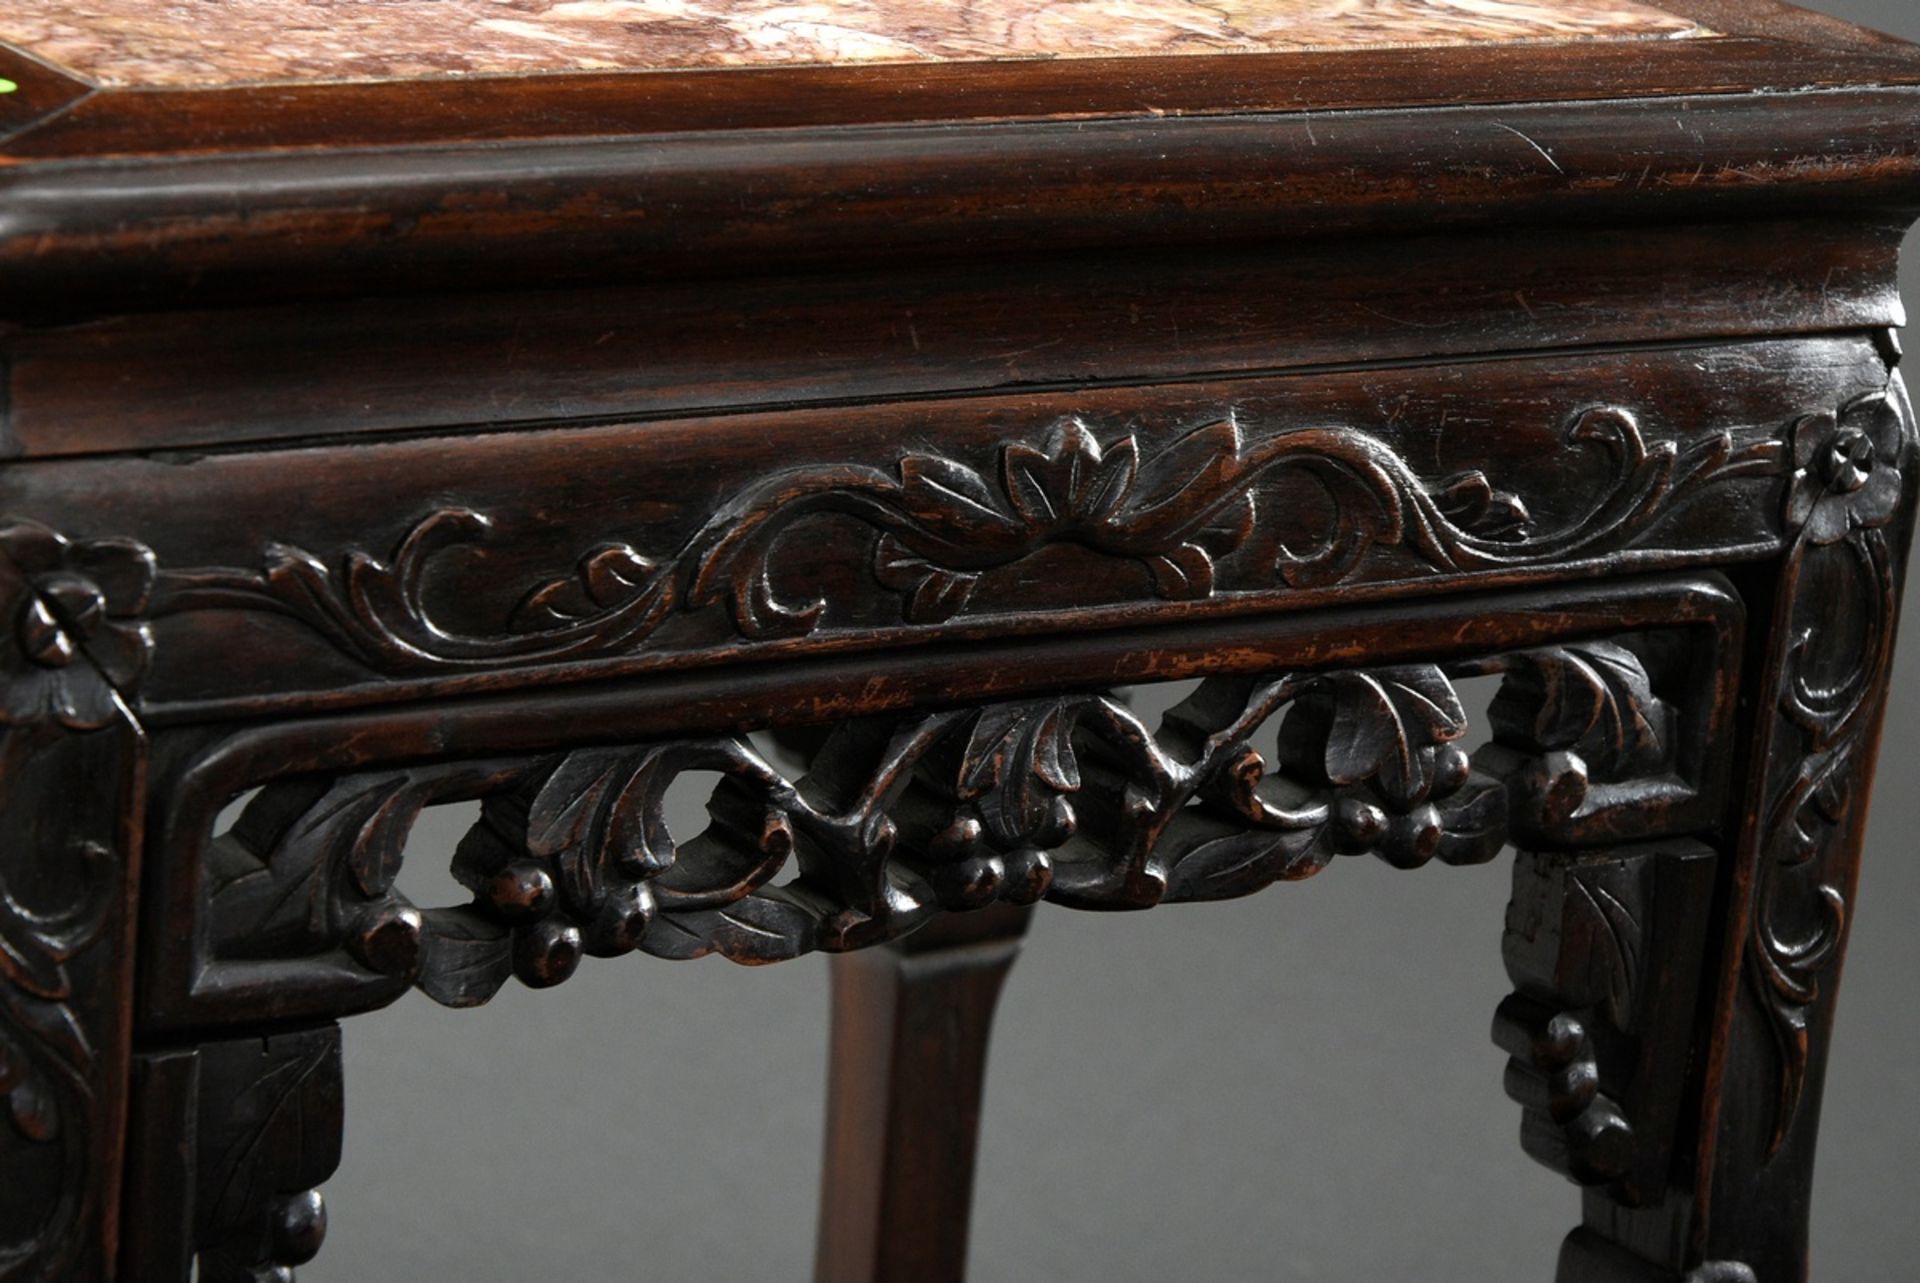 Chinese stool with floral carved blackwood frame and reddish marble top, around 1900, 47,5x41x30,5c - Image 3 of 3